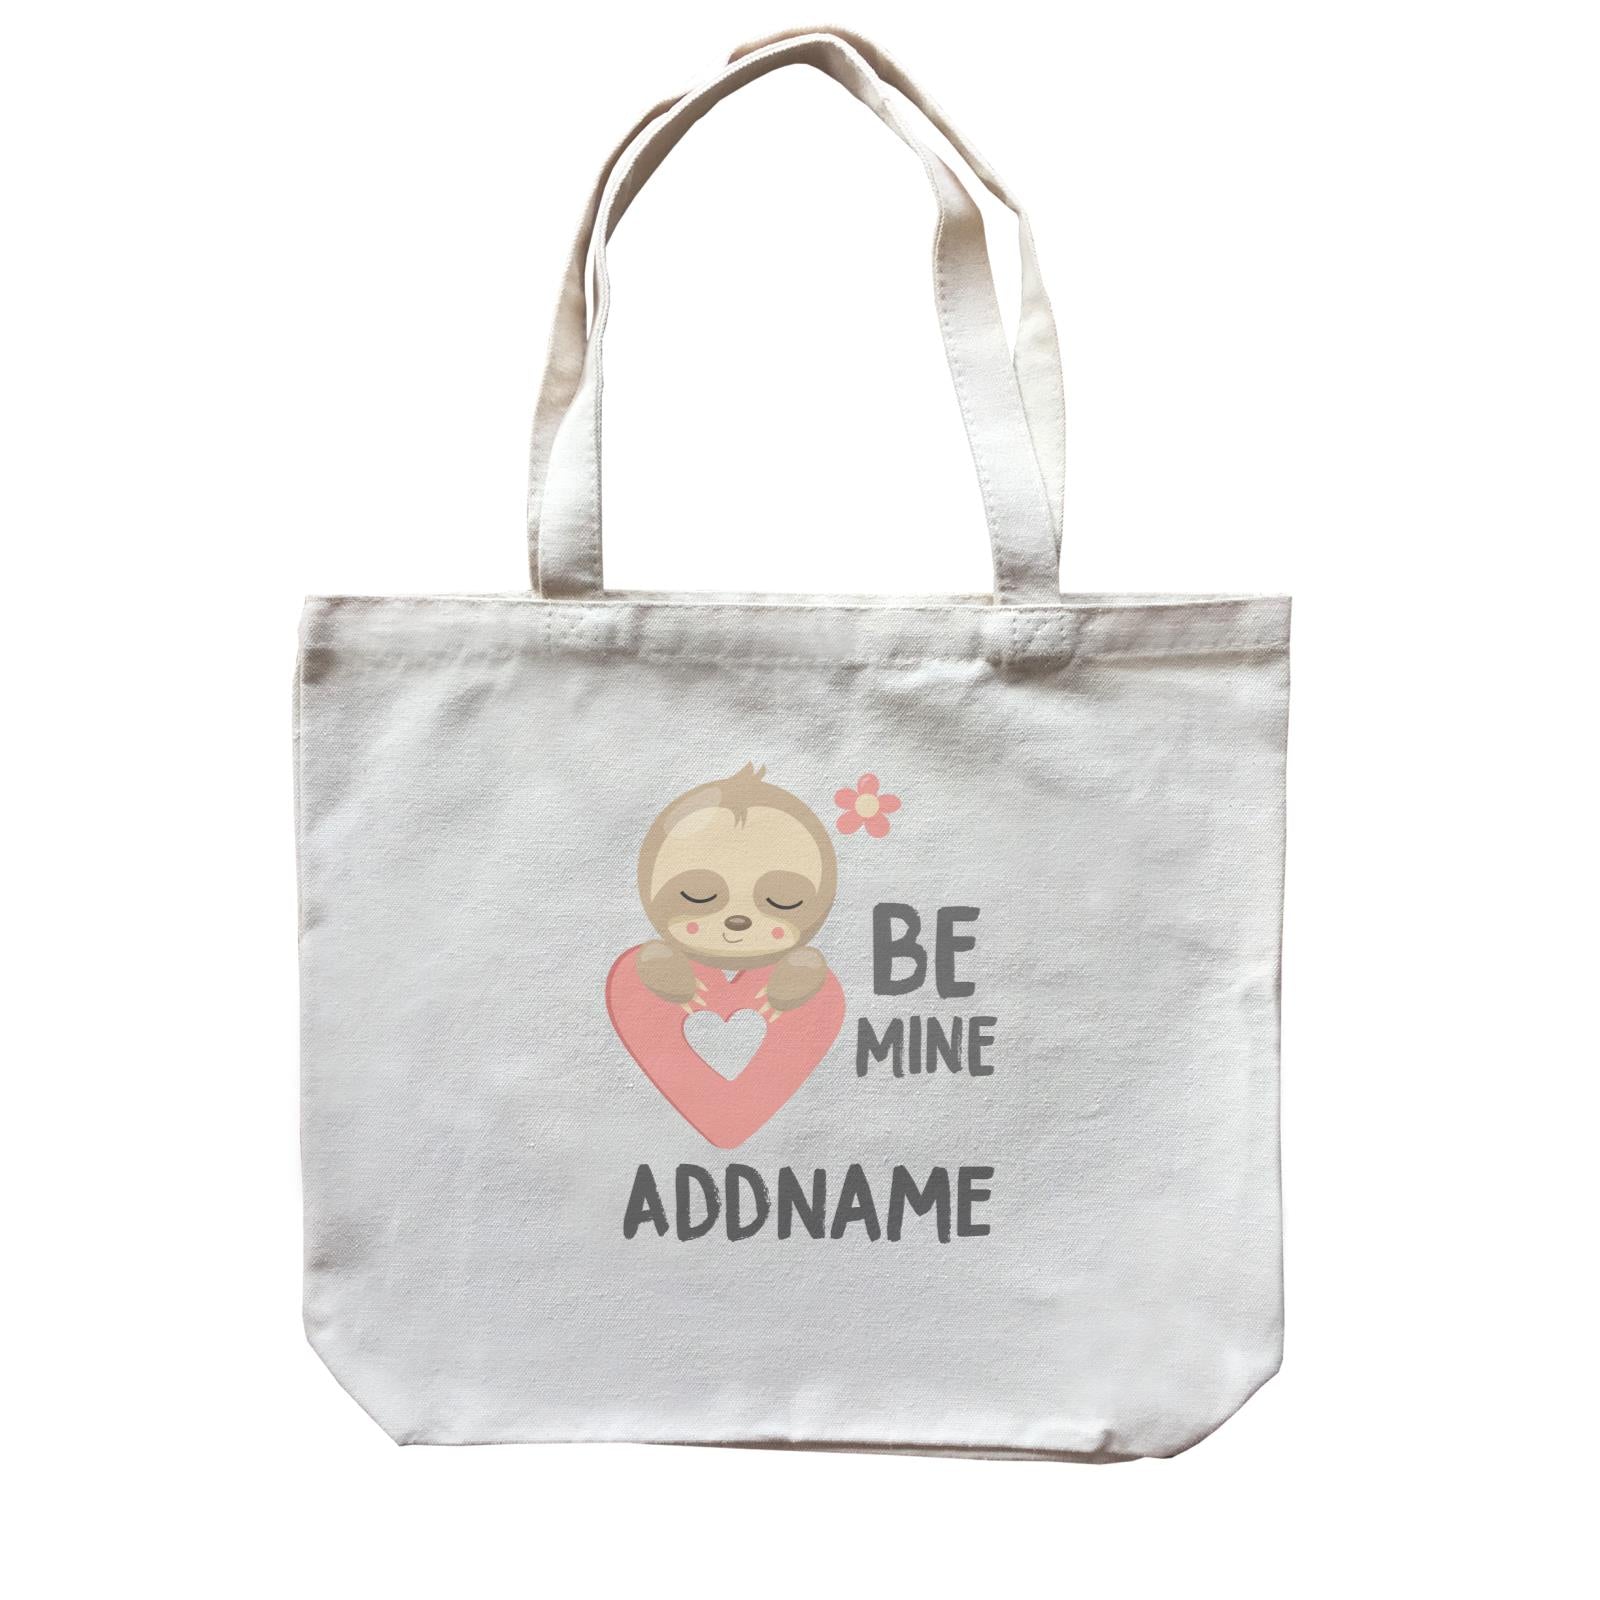 Cute Sloth Be Mine with Heart Addname Canvas Bag